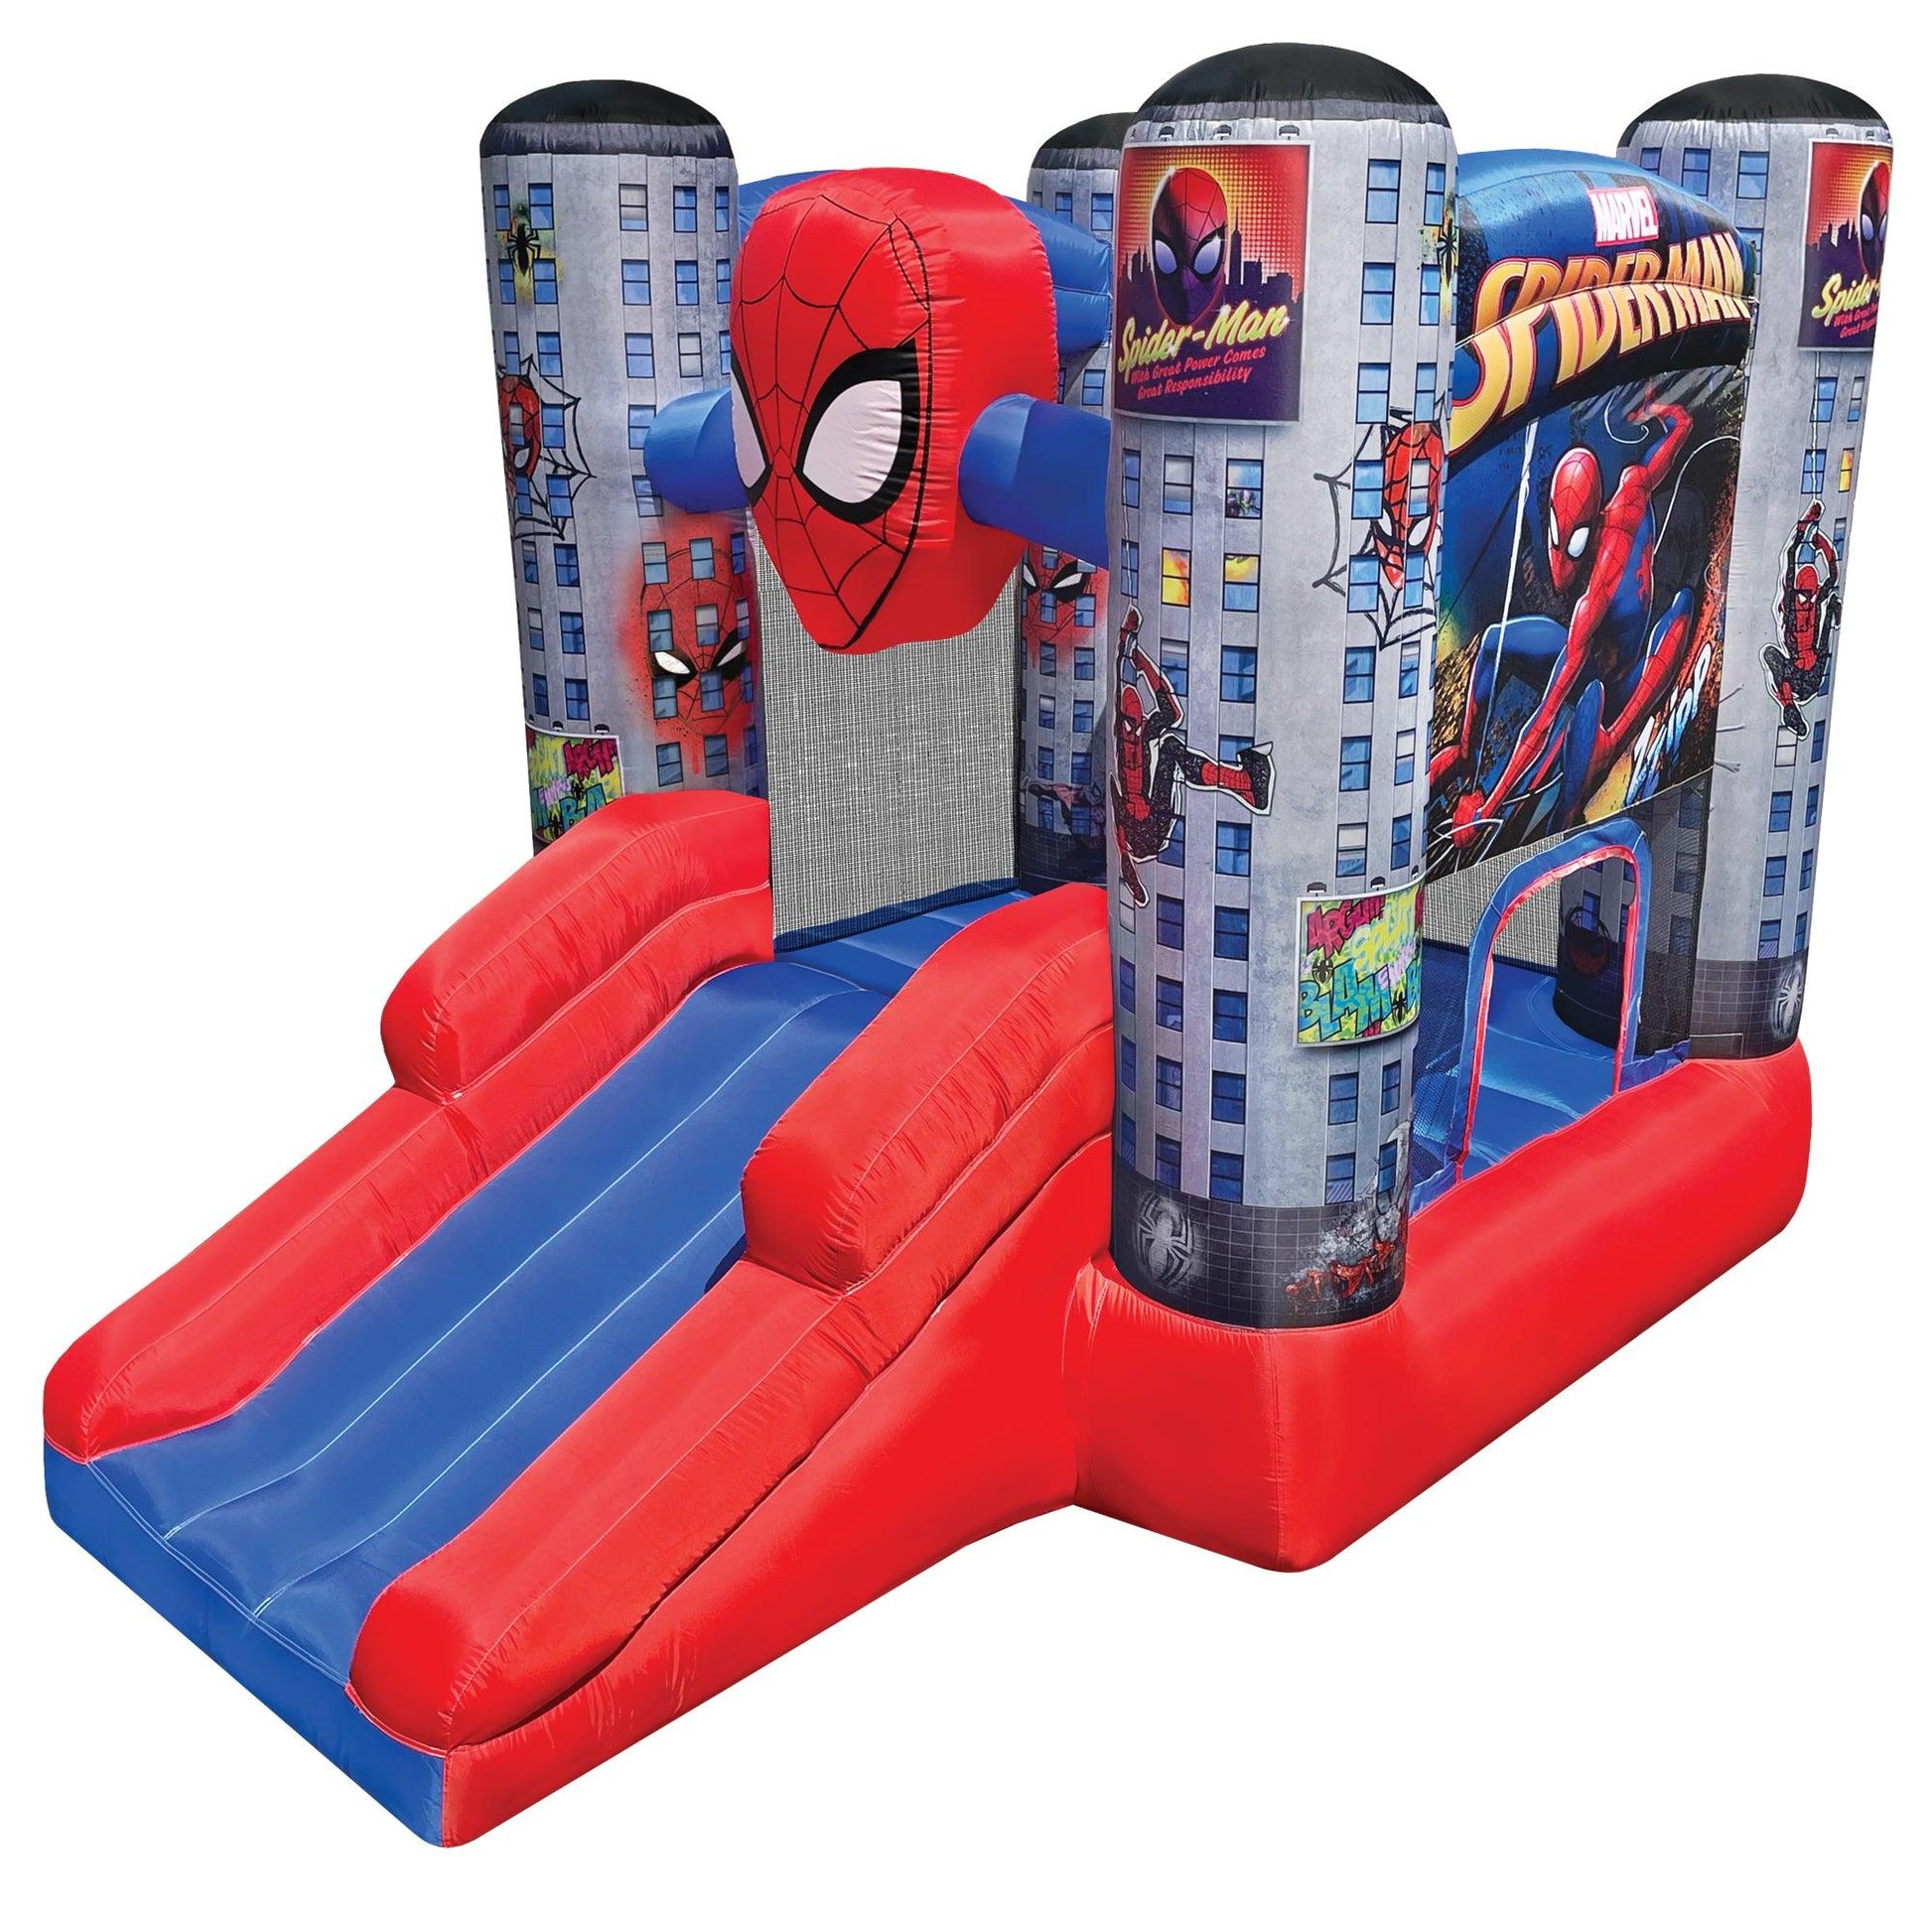 Spider-Man Bounce and Slide Inflatable for Sale